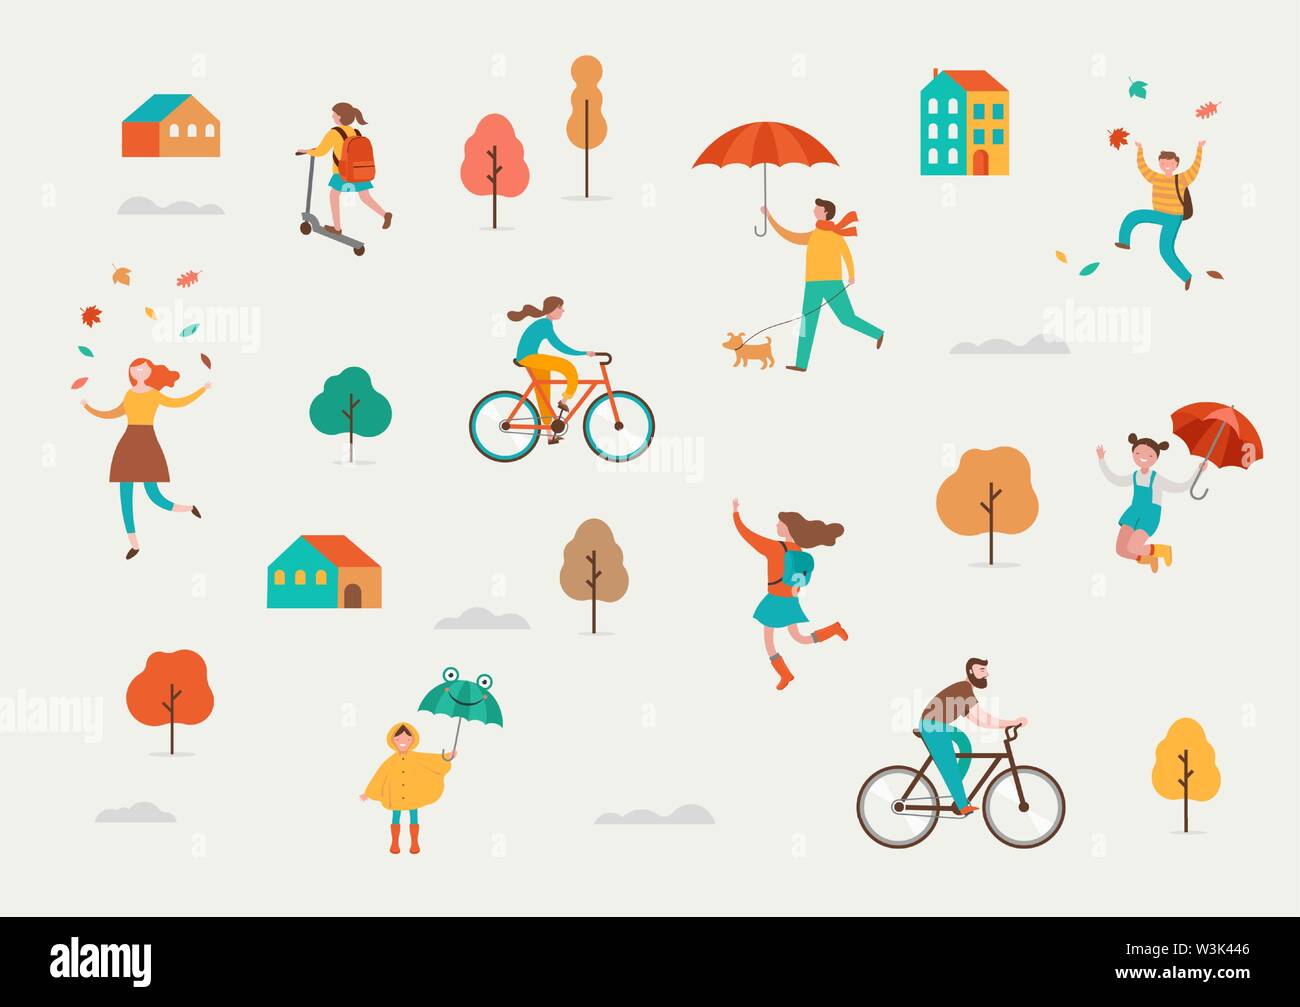 Autumn, fall scene with various cute people, families and children having fun, playing with autumn leaves and jumping with an umbrellas. Crowd of tiny Stock Vector